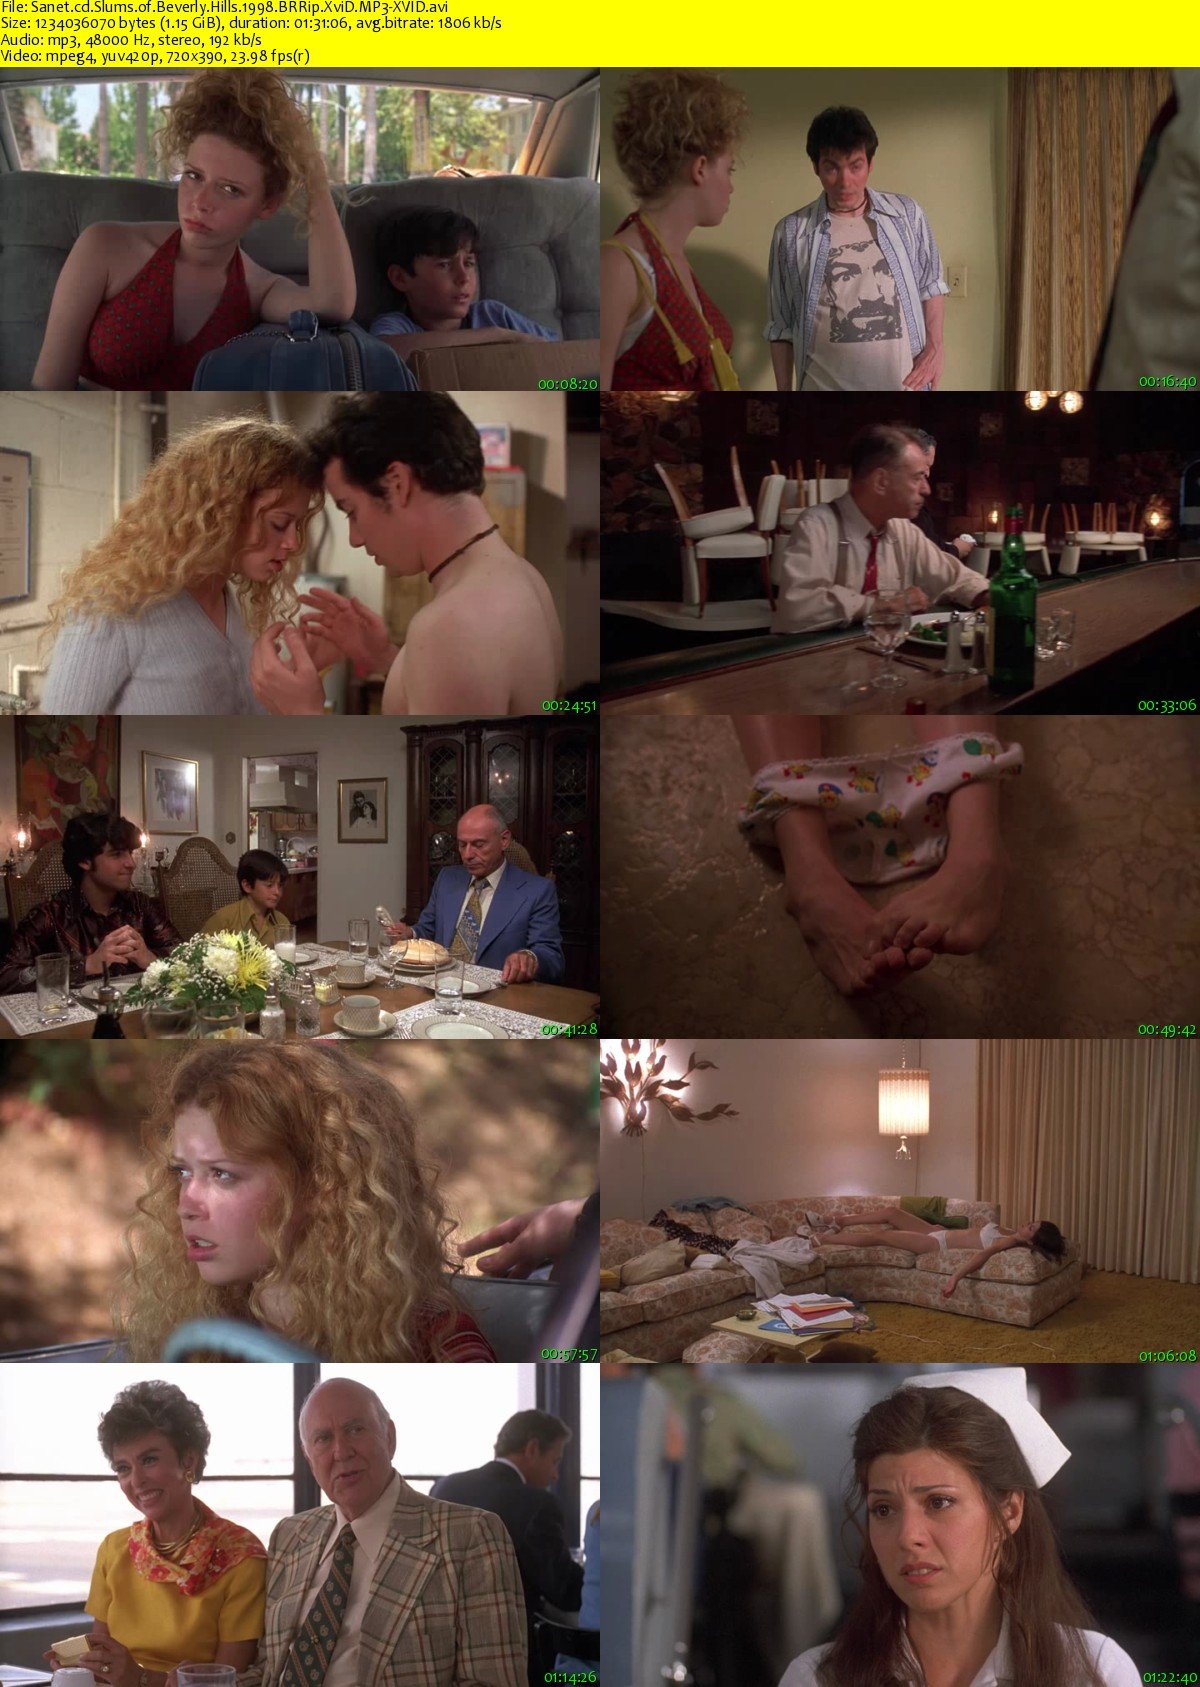 Download Slums of Beverly Hills 1998 BRRip XviD MP3-XVID - S